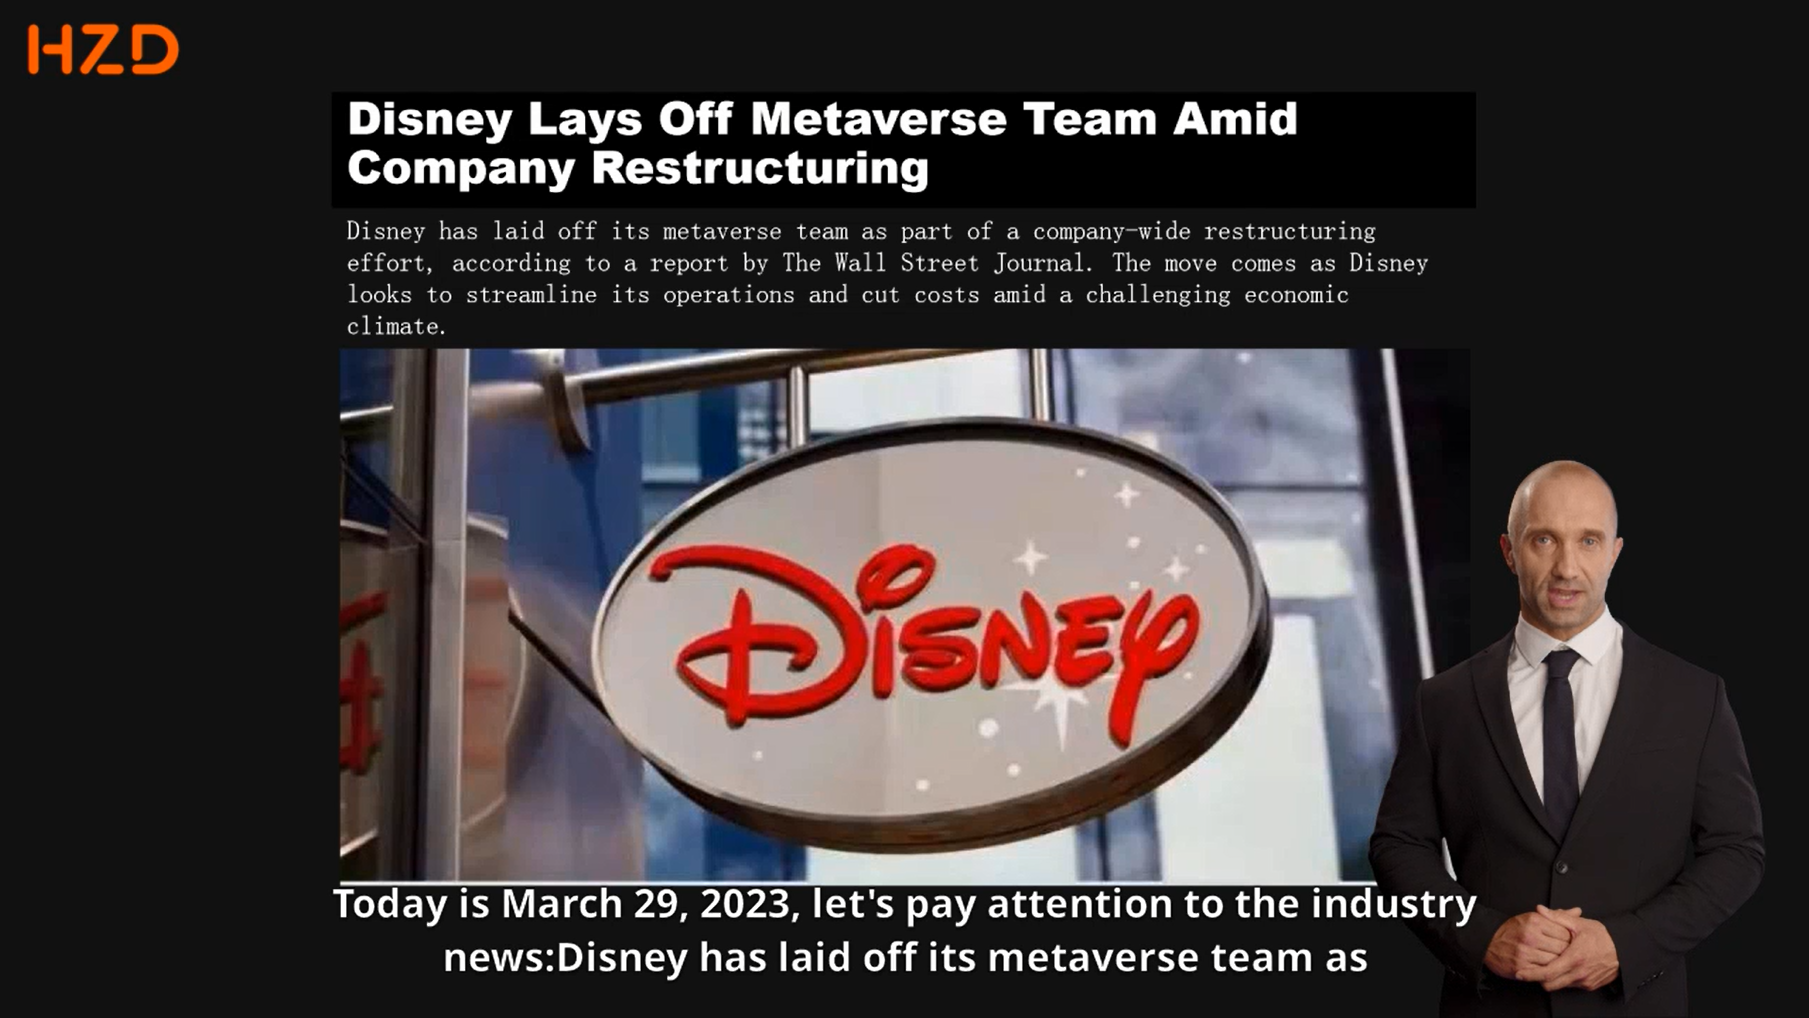 Disney Lays Off Metaverse Team Amid Company Restructuring